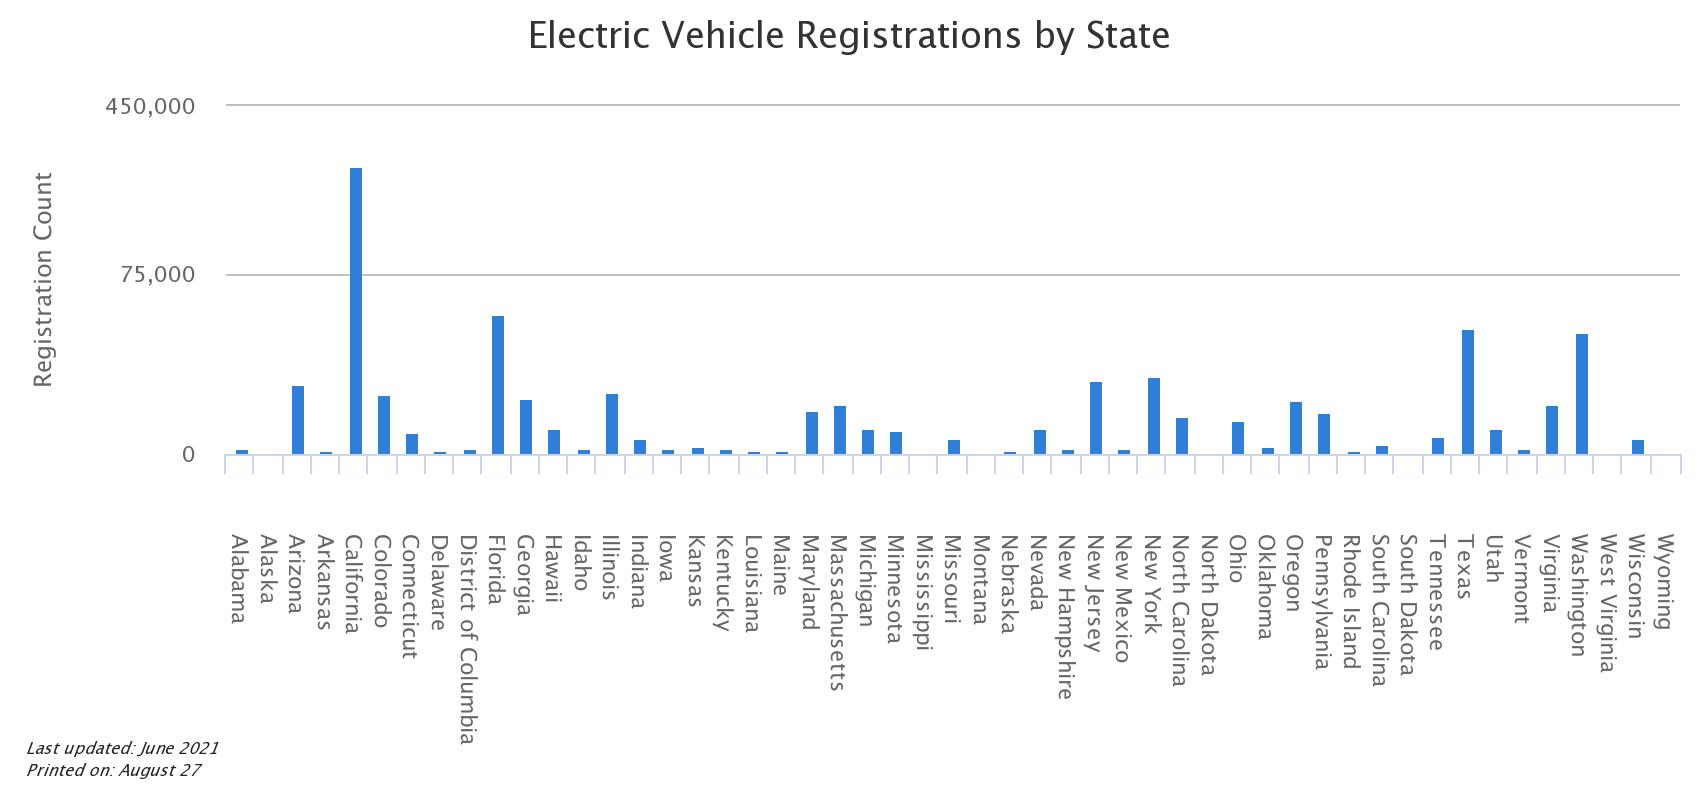 Number of electric vehicles by state